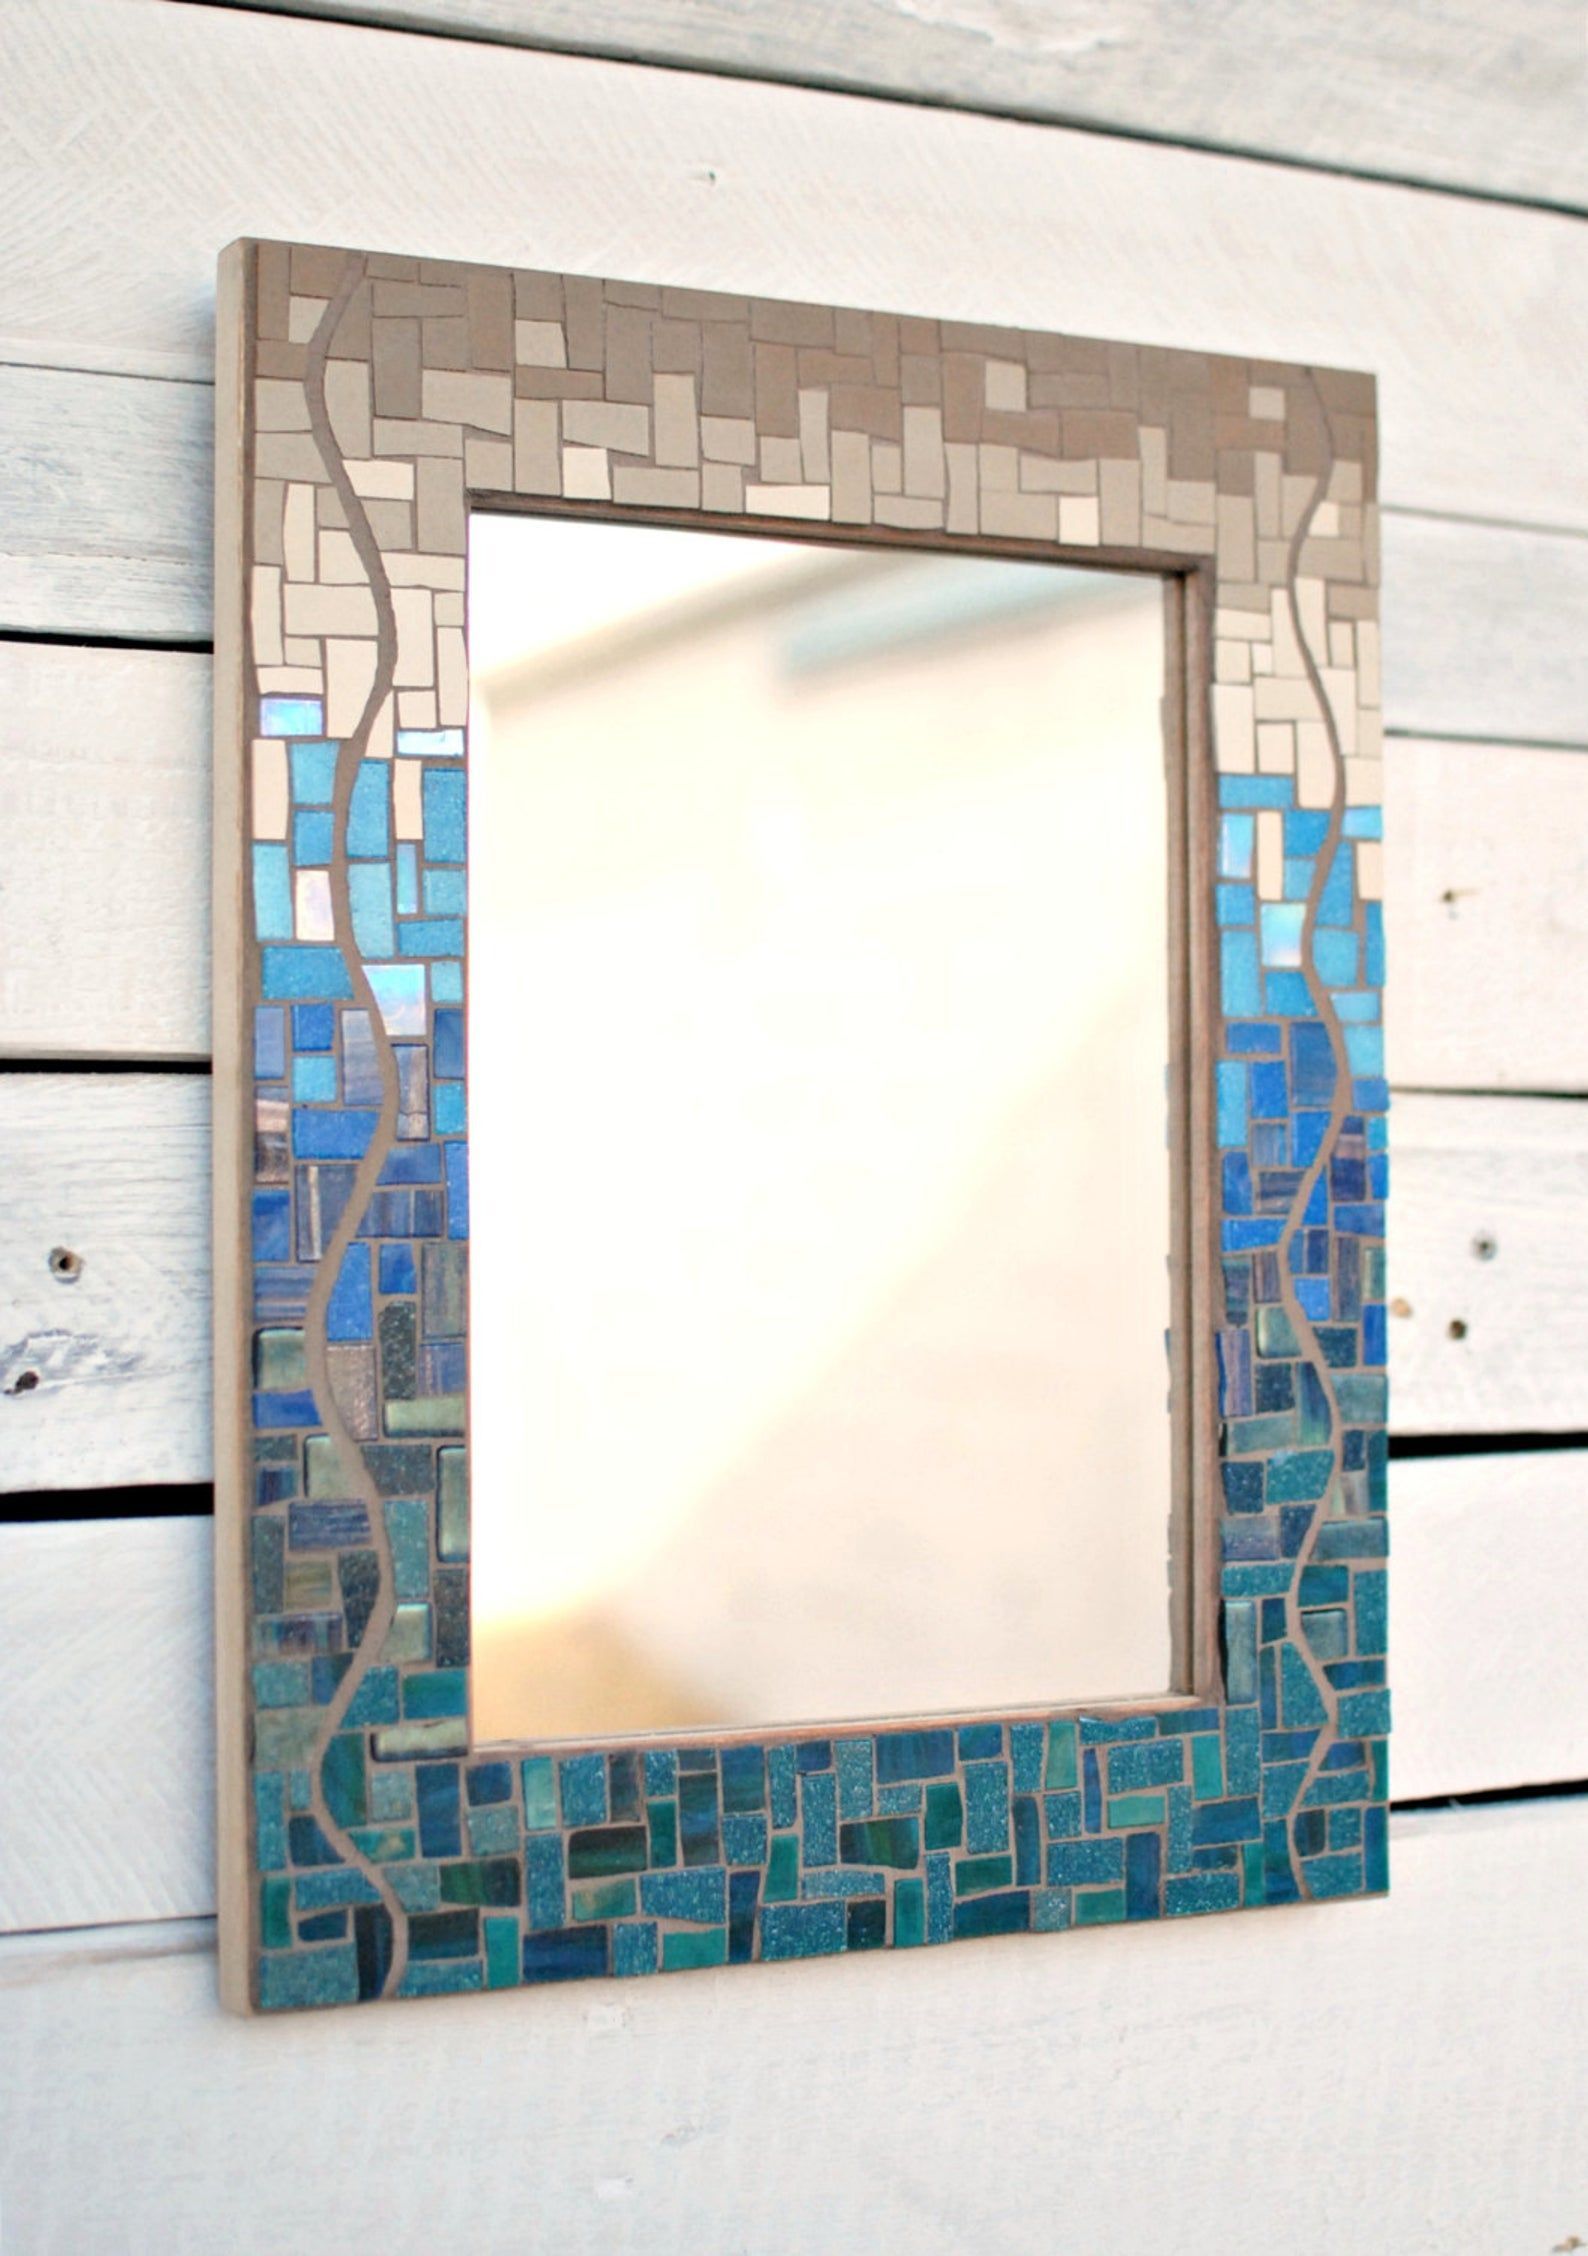 Mosaic Wall Mirror Seaside Gradient Mirror Ready To Ship | Etsy In Subtle Blues Art Glass Wall Mirrors (View 5 of 15)